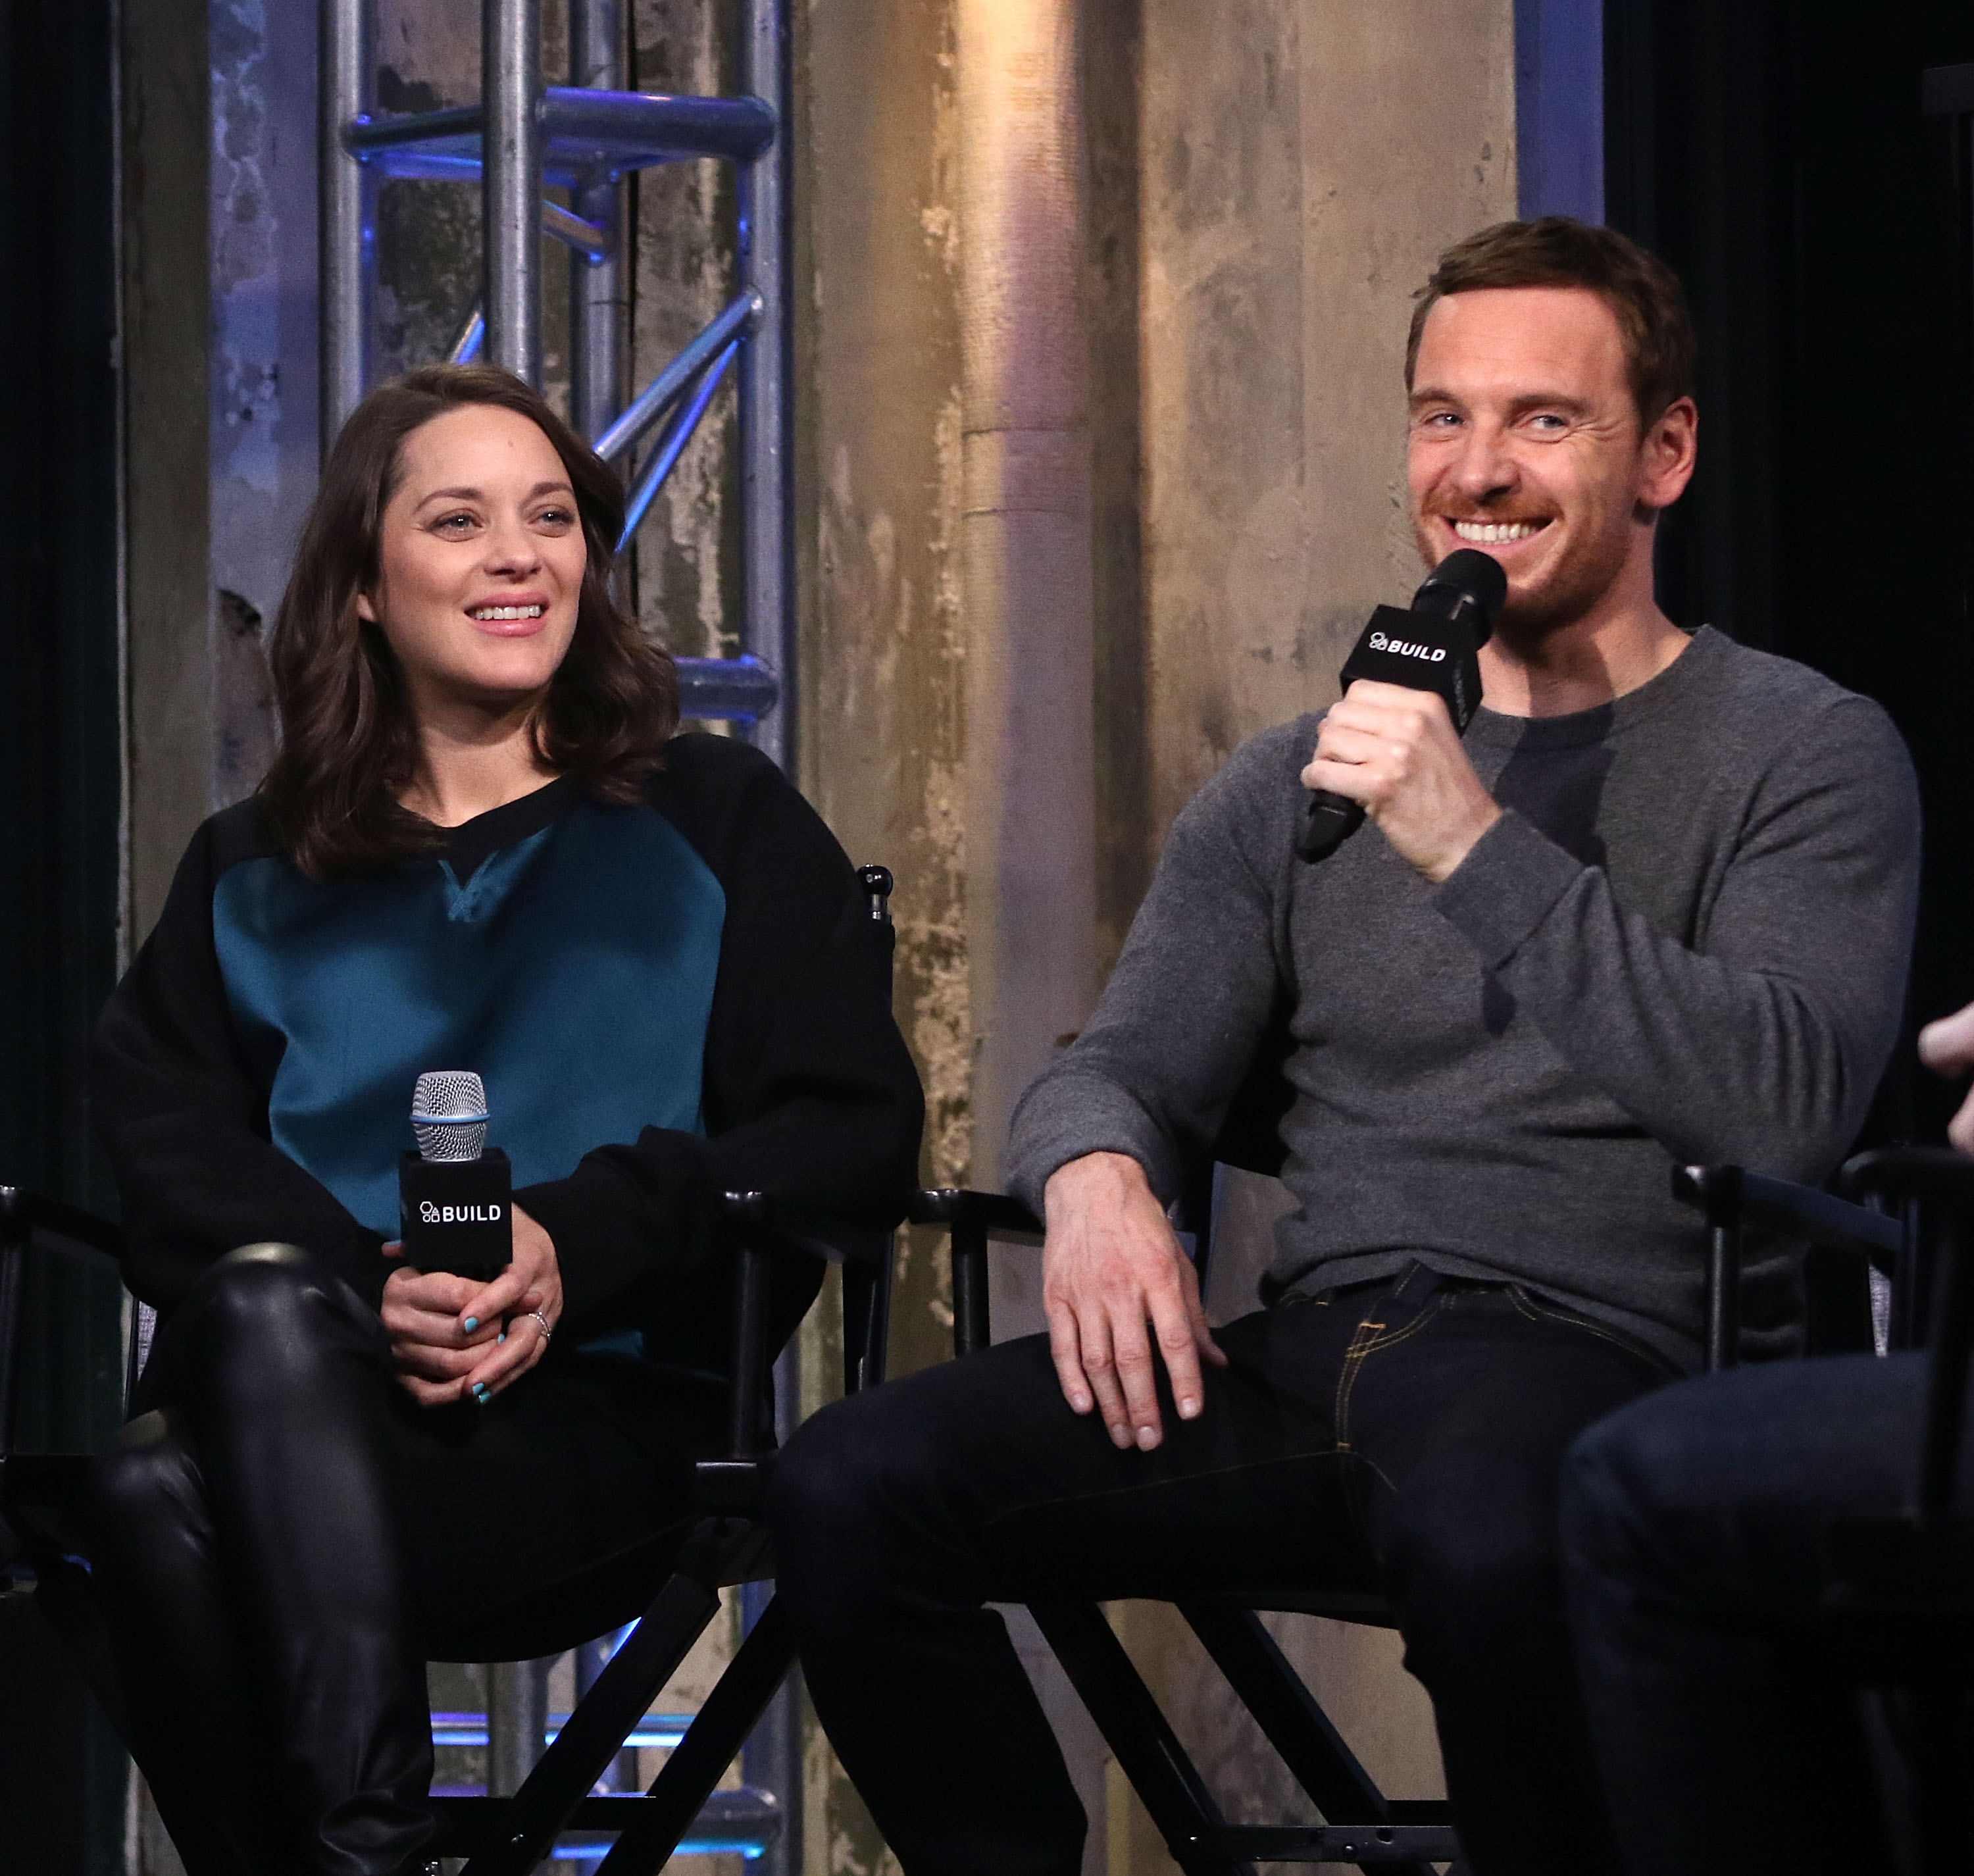 Marion Cotillard attends AOL Build to discuss the movie ‘Assassin’s Creed’